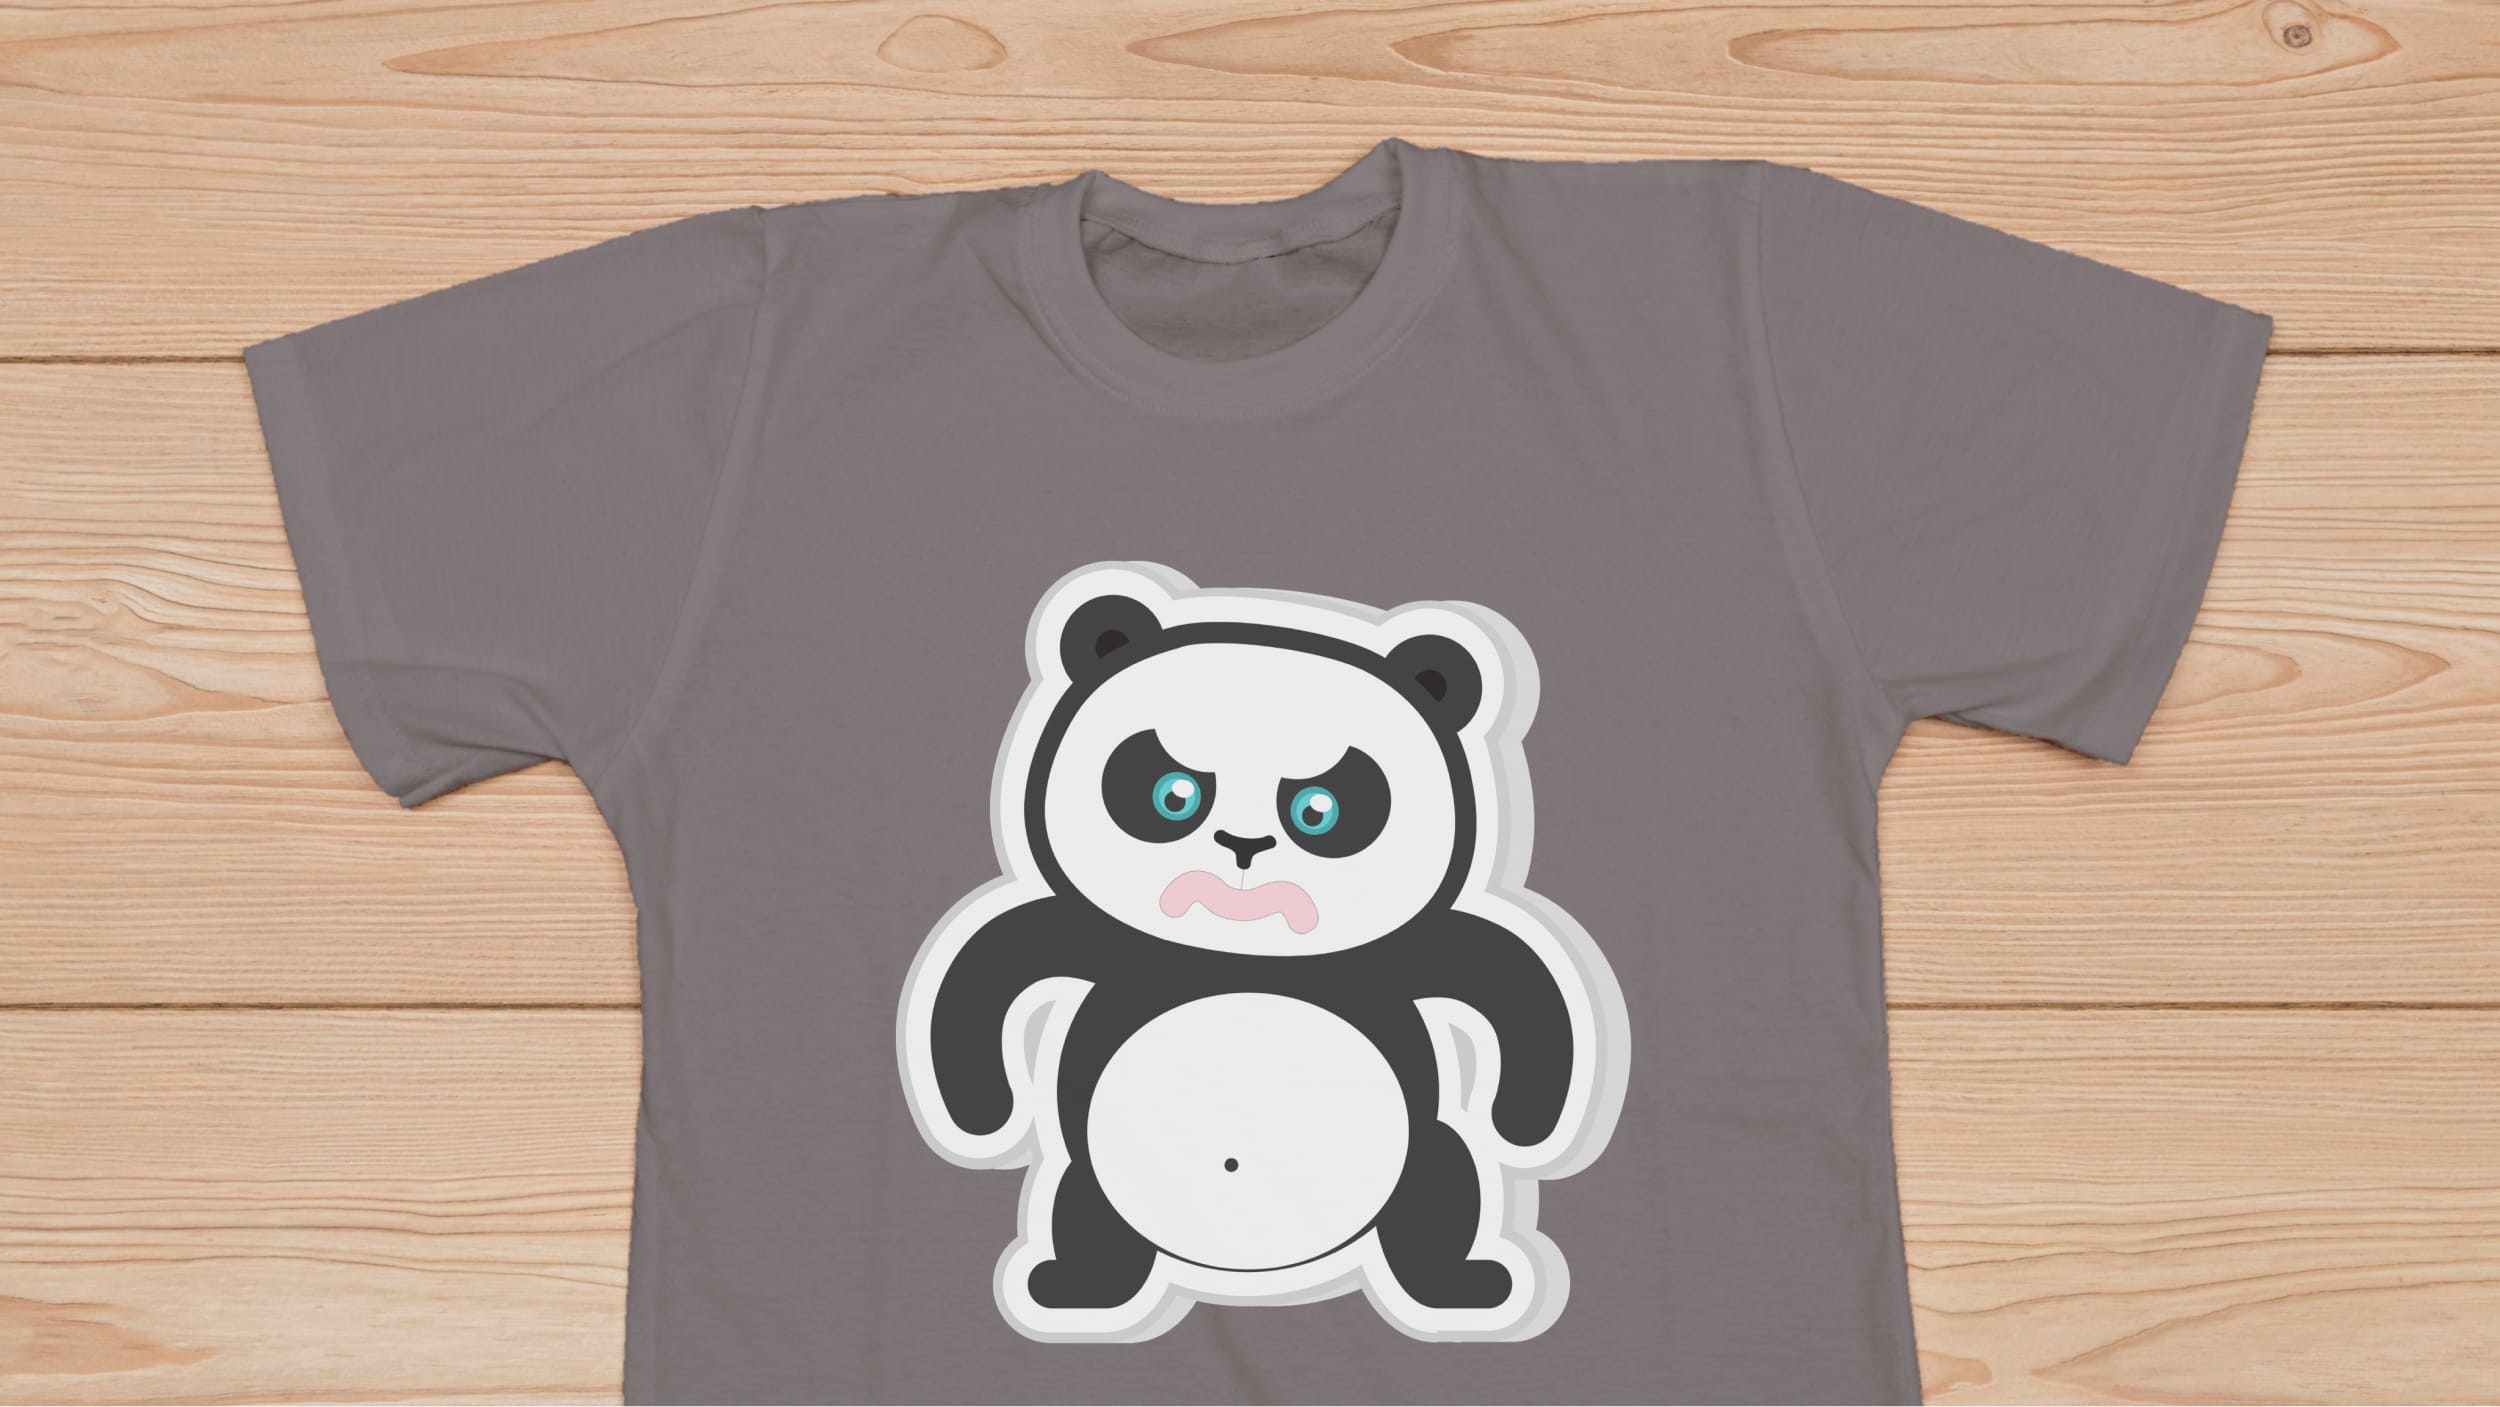 Gray t-shirt with angry panda bear on a wooden background.